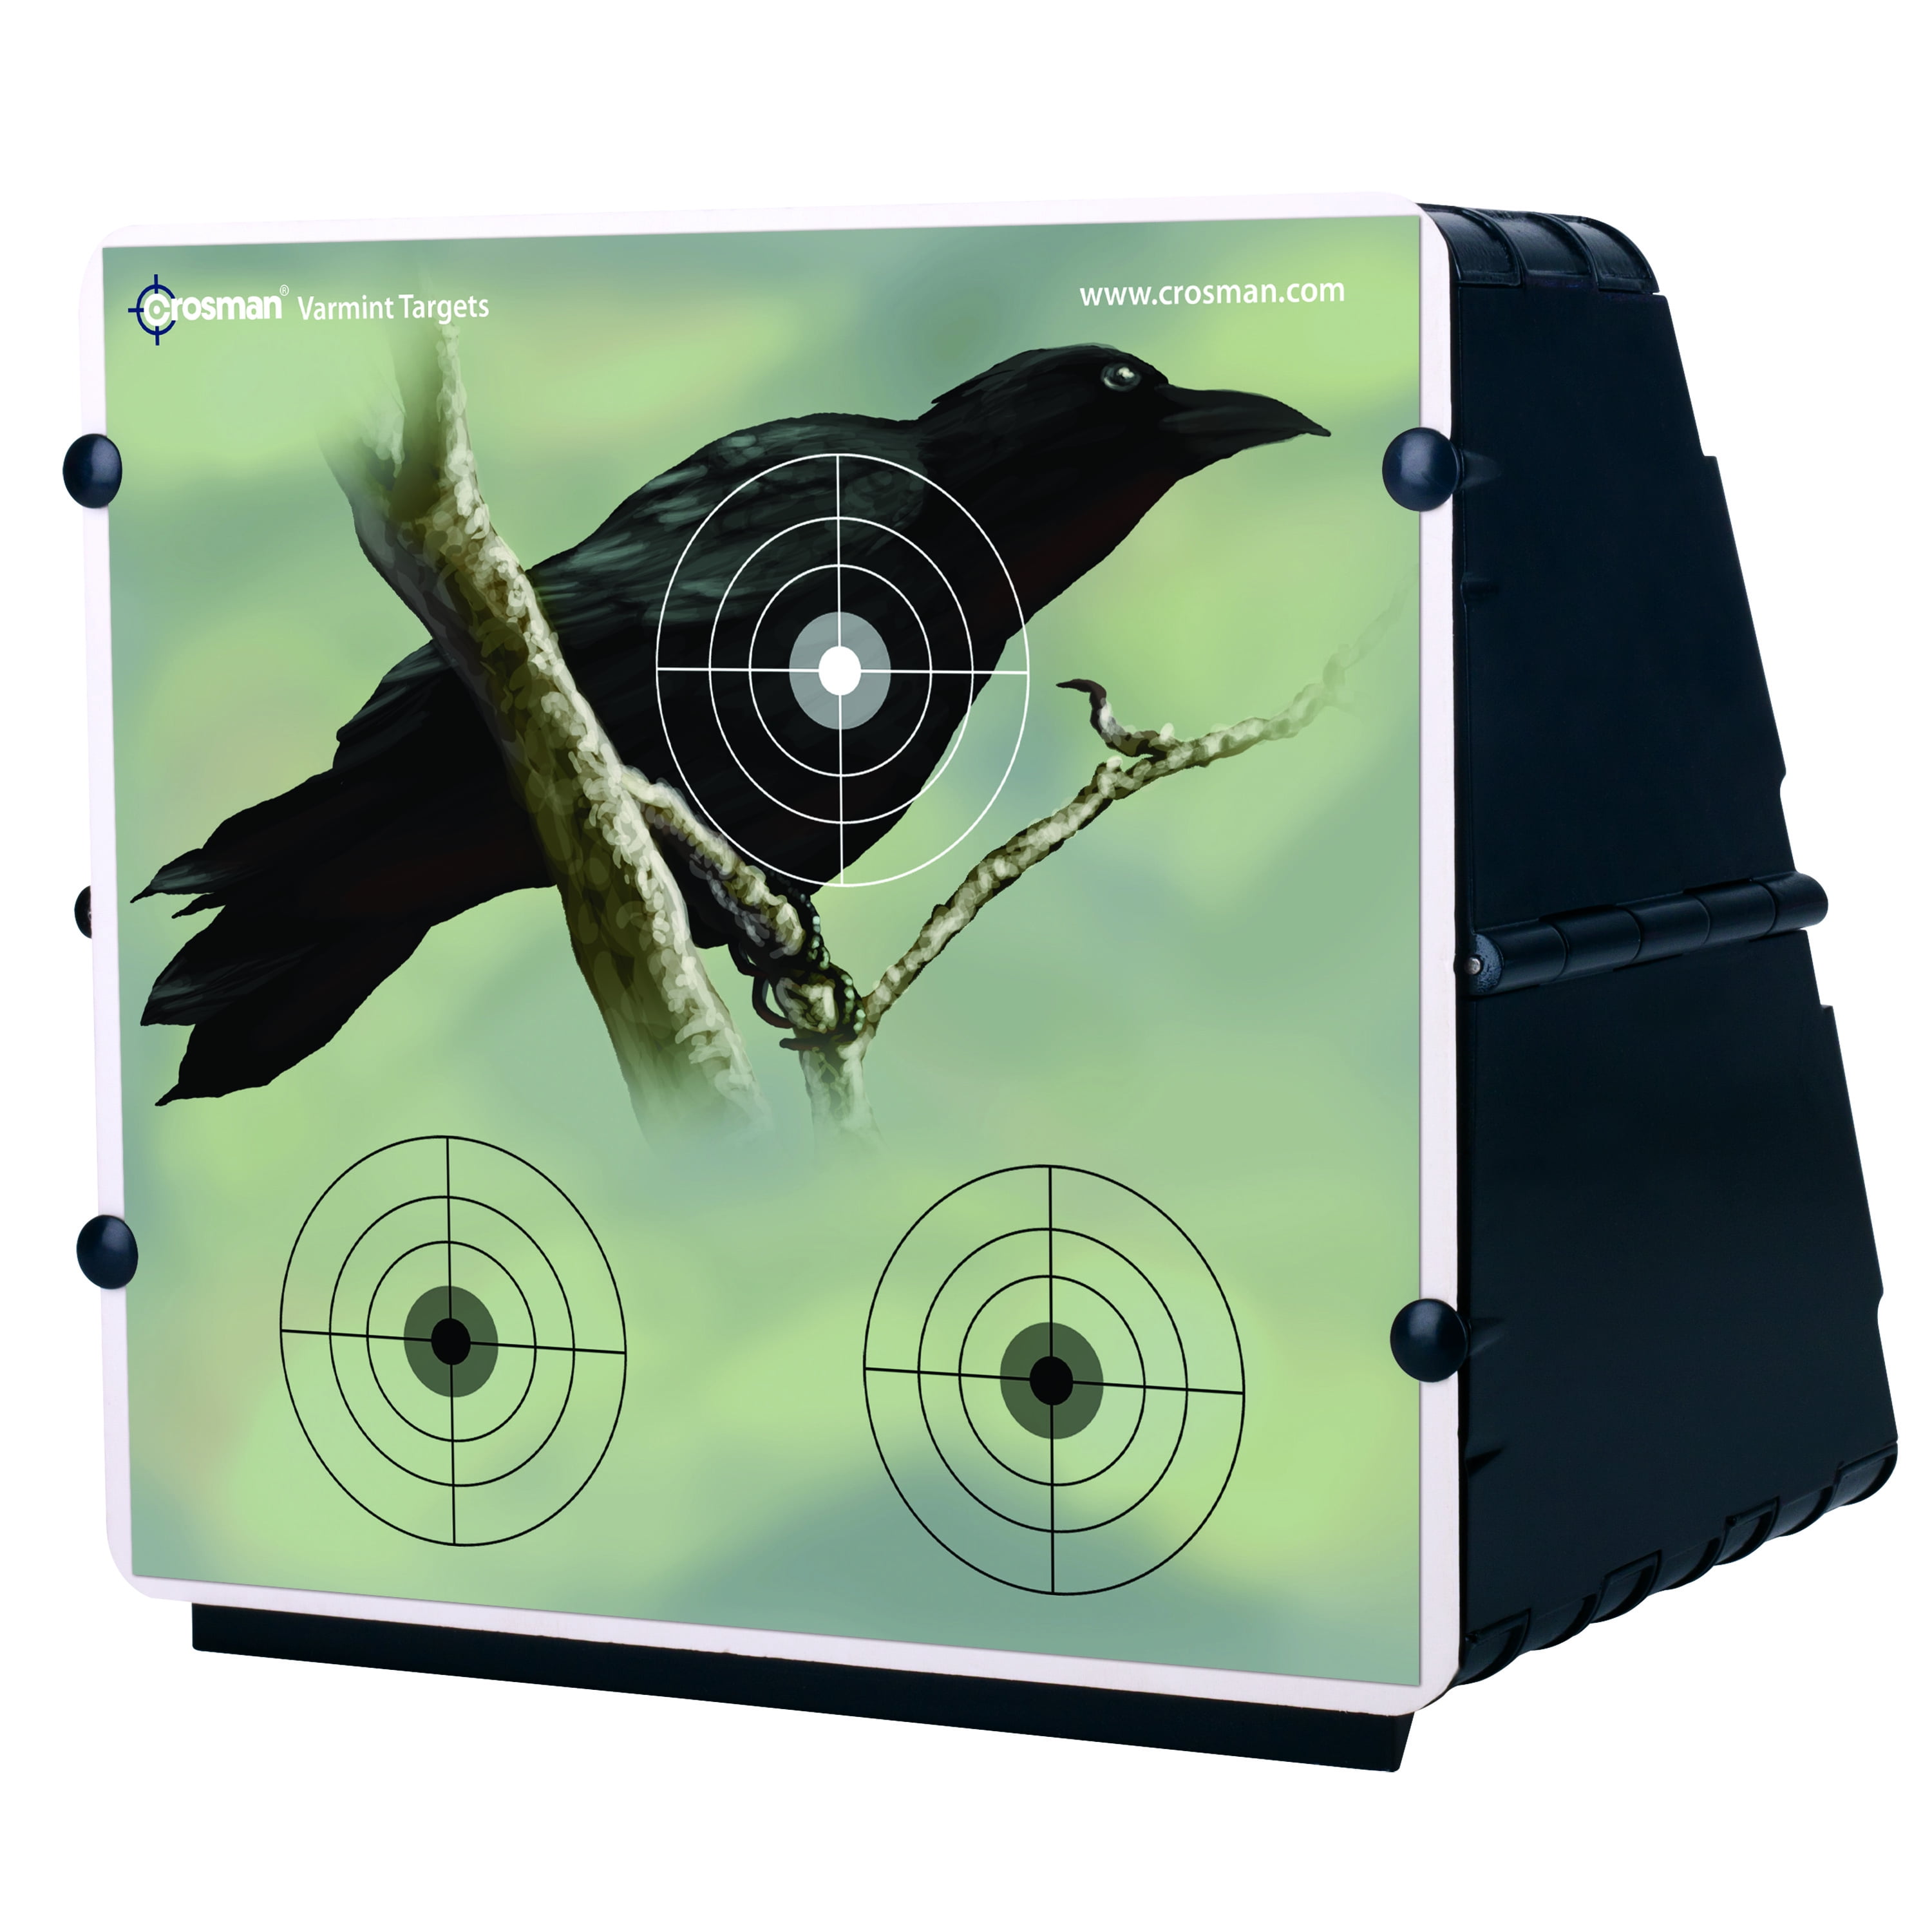 Details about   Air Strike Pellet Trap Shooting Target Rated for 800fps Airgun SOLID BACKDROP 